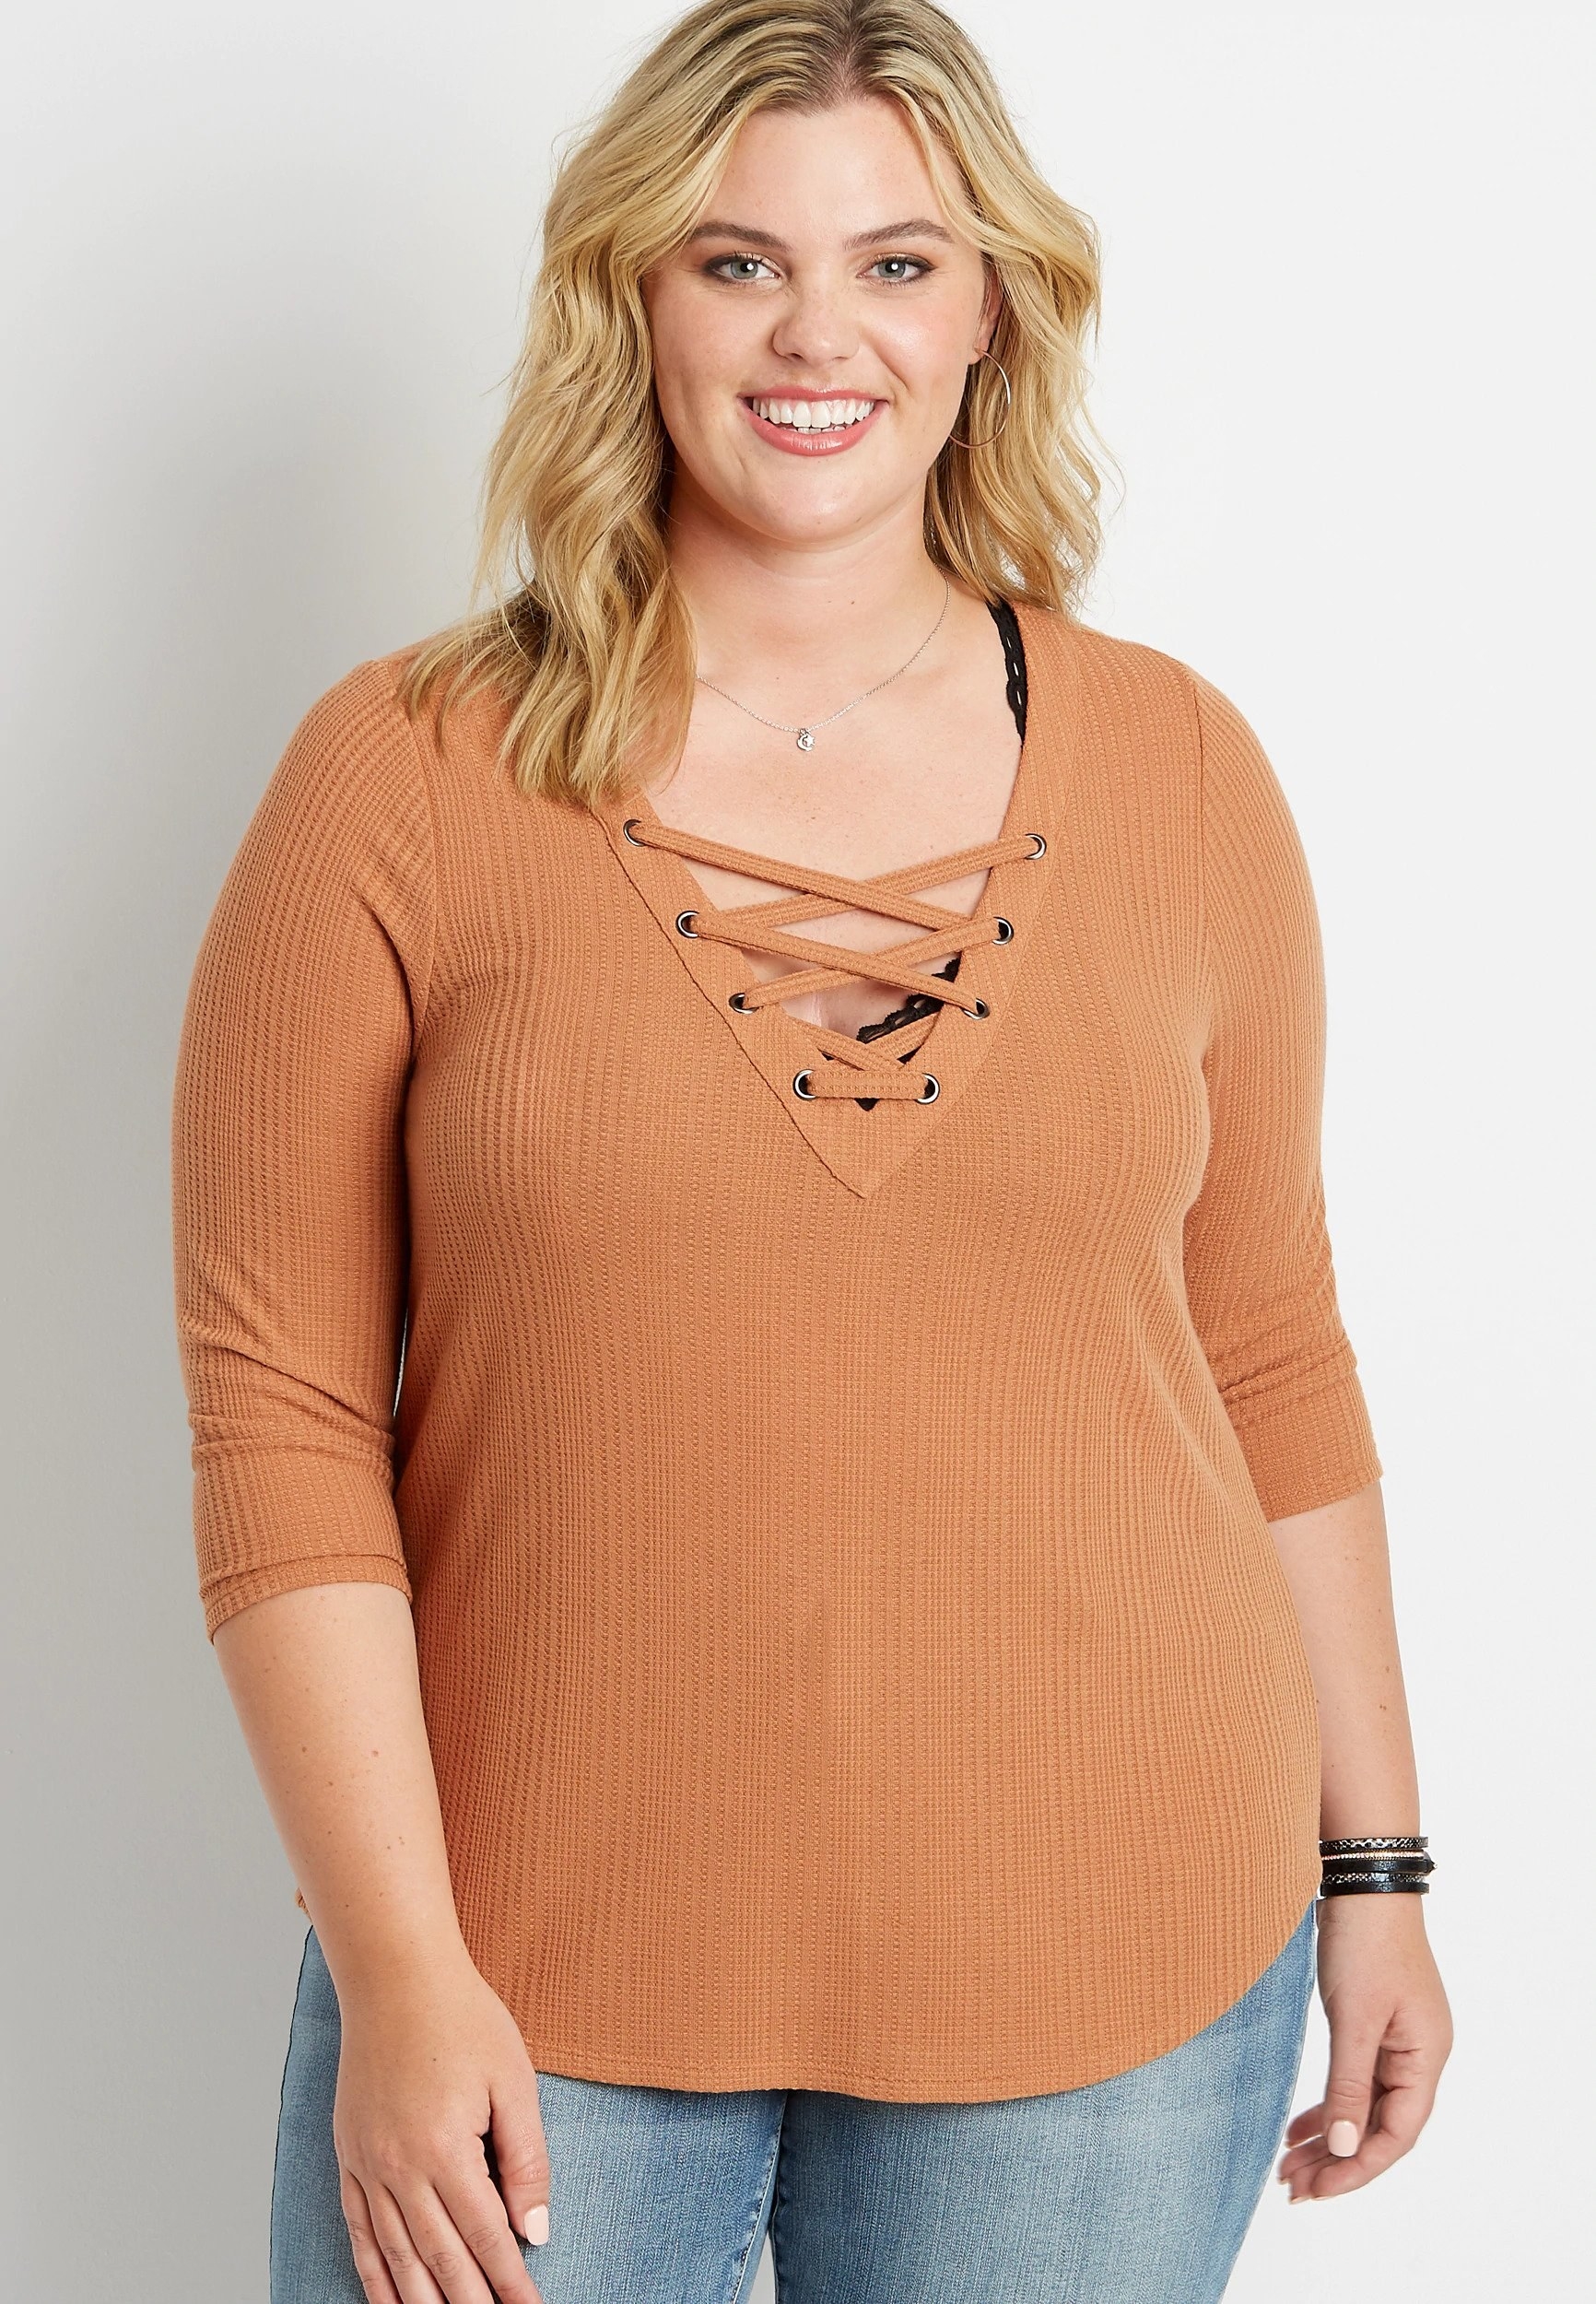 v neck top with criss cross lacing neckline 